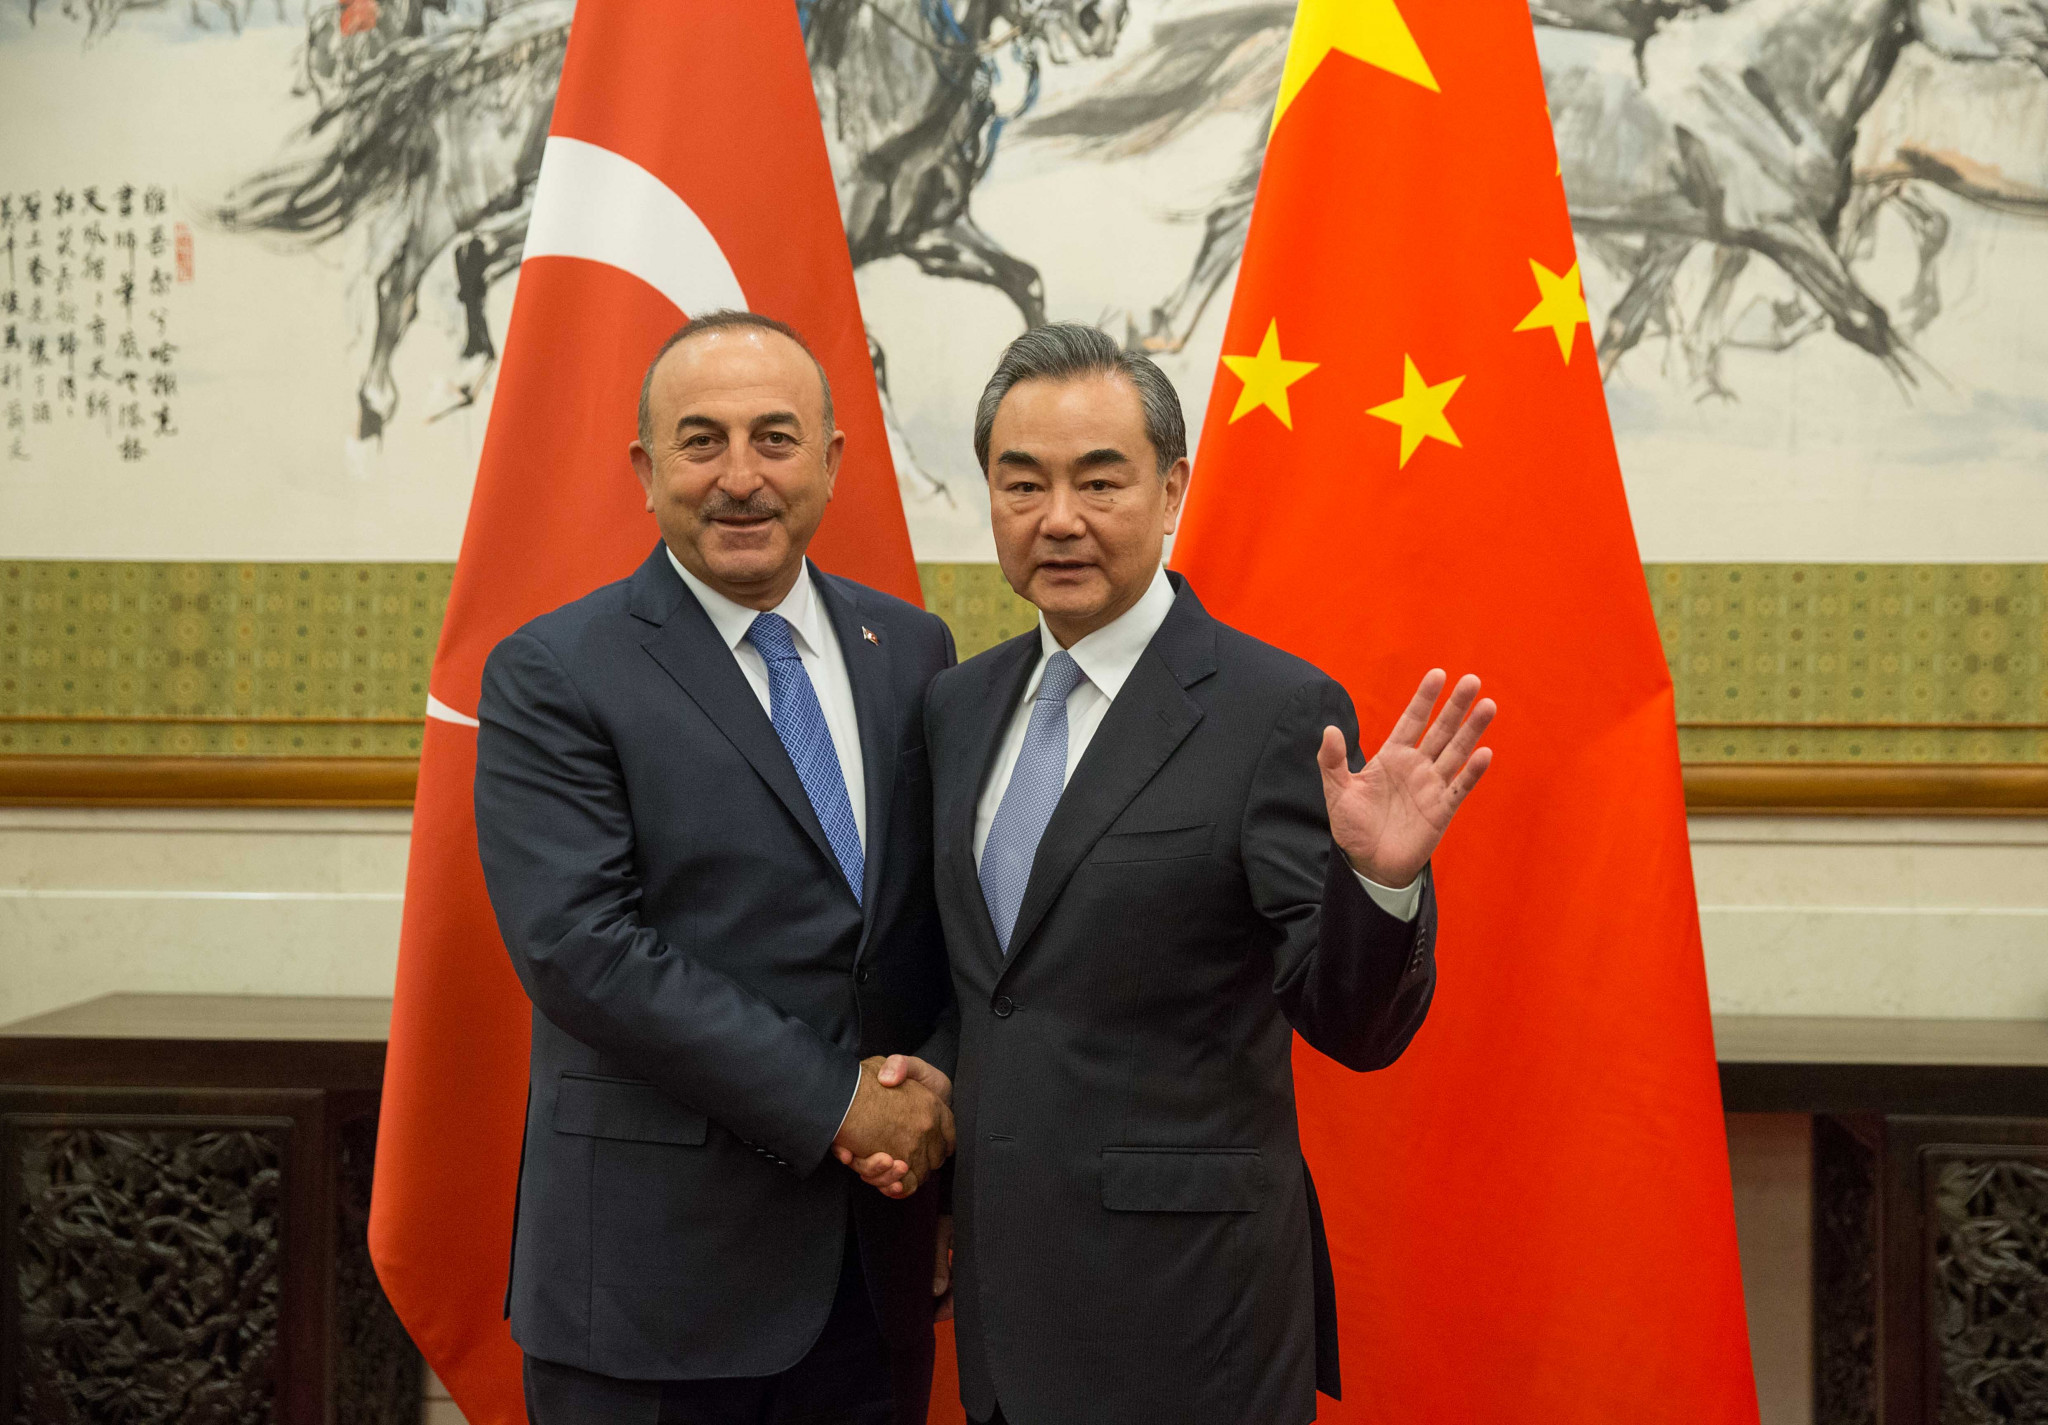 Uyghur Muslims in Xinjiang were discussed by Turkish Foreign Minister Mevlüt Çavuşoğlu, left, and his Chinese counterpart Wang Yi, right, according to the Turkish side ©Getty Images